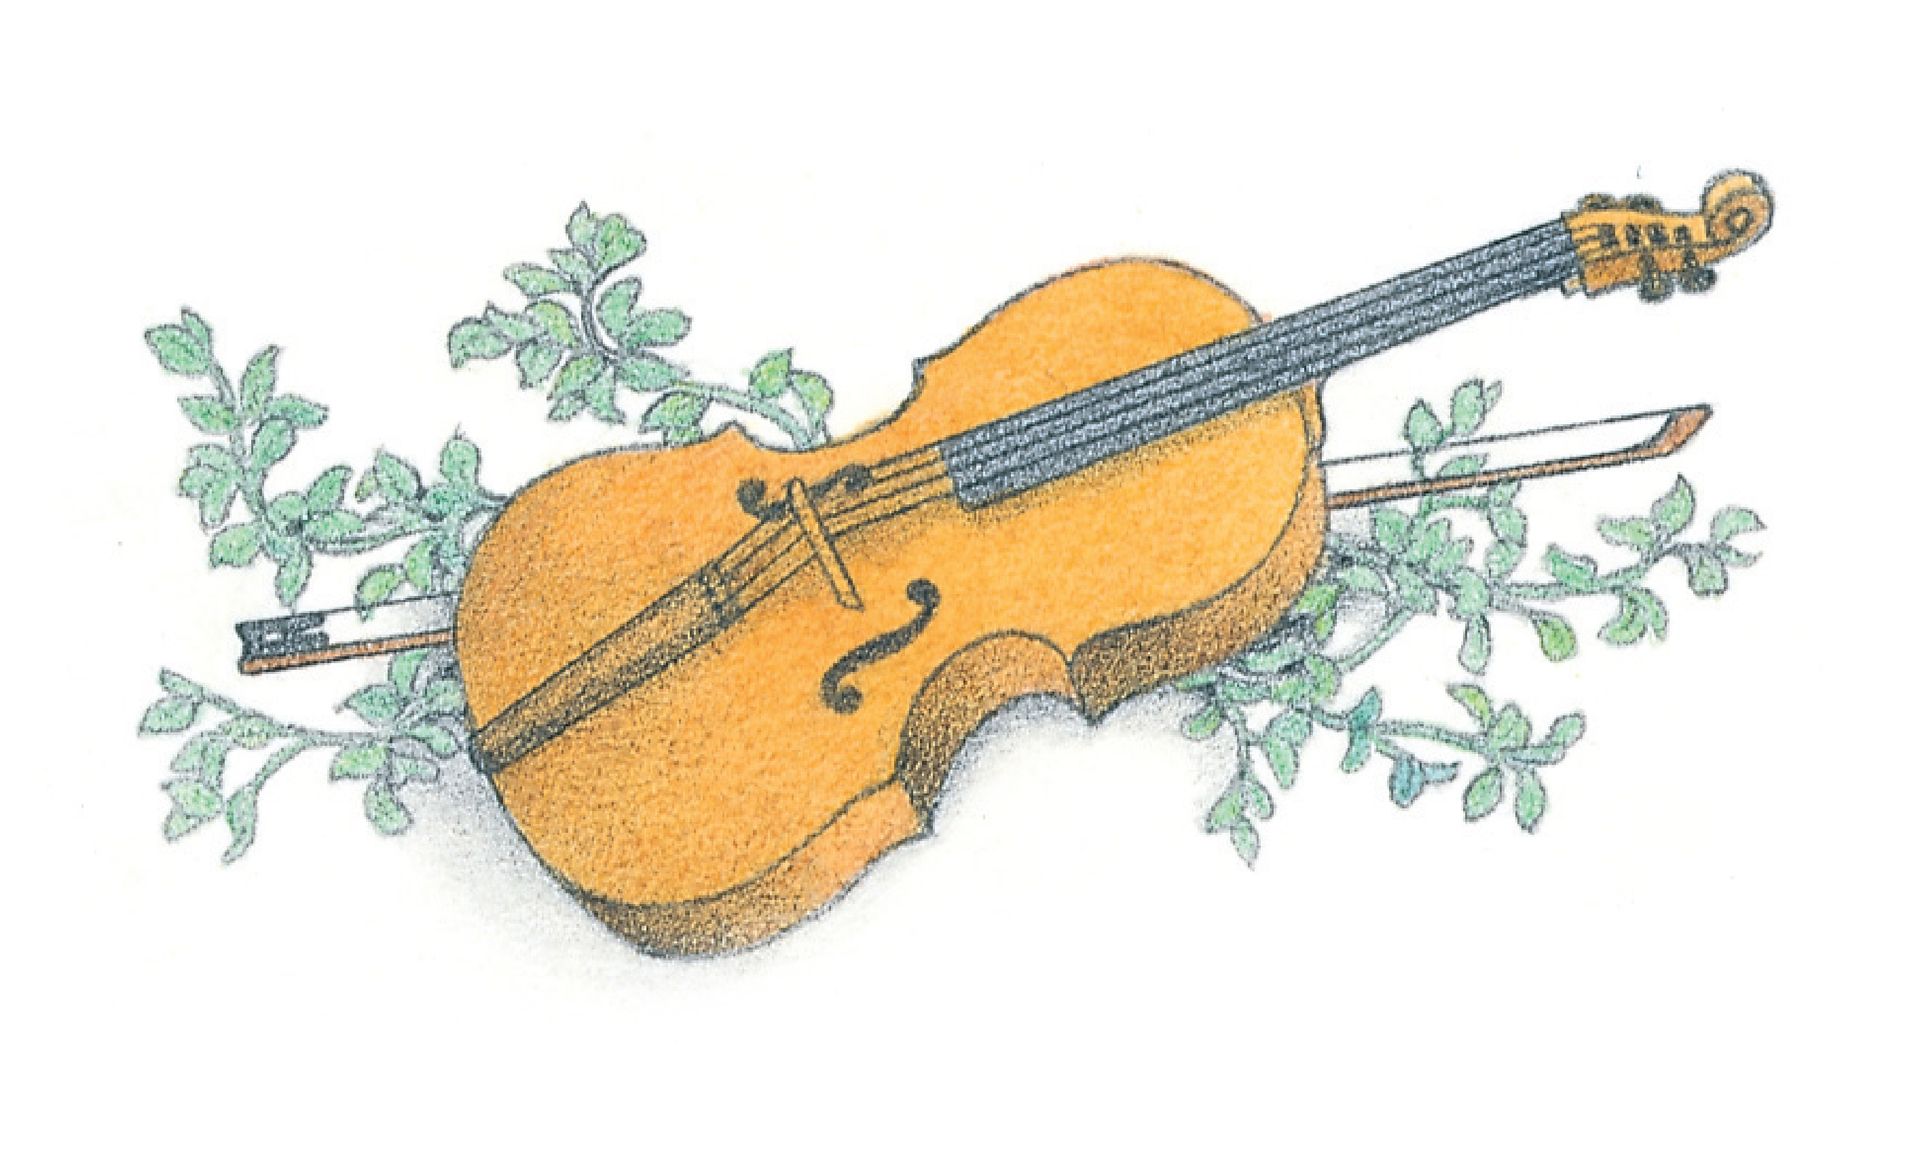 A violin and bow lying with a leafy branch. From the Children’s Songbook, page 222, “Whenever I Think about Pioneers”; watercolor illustration by Beth Whittaker.